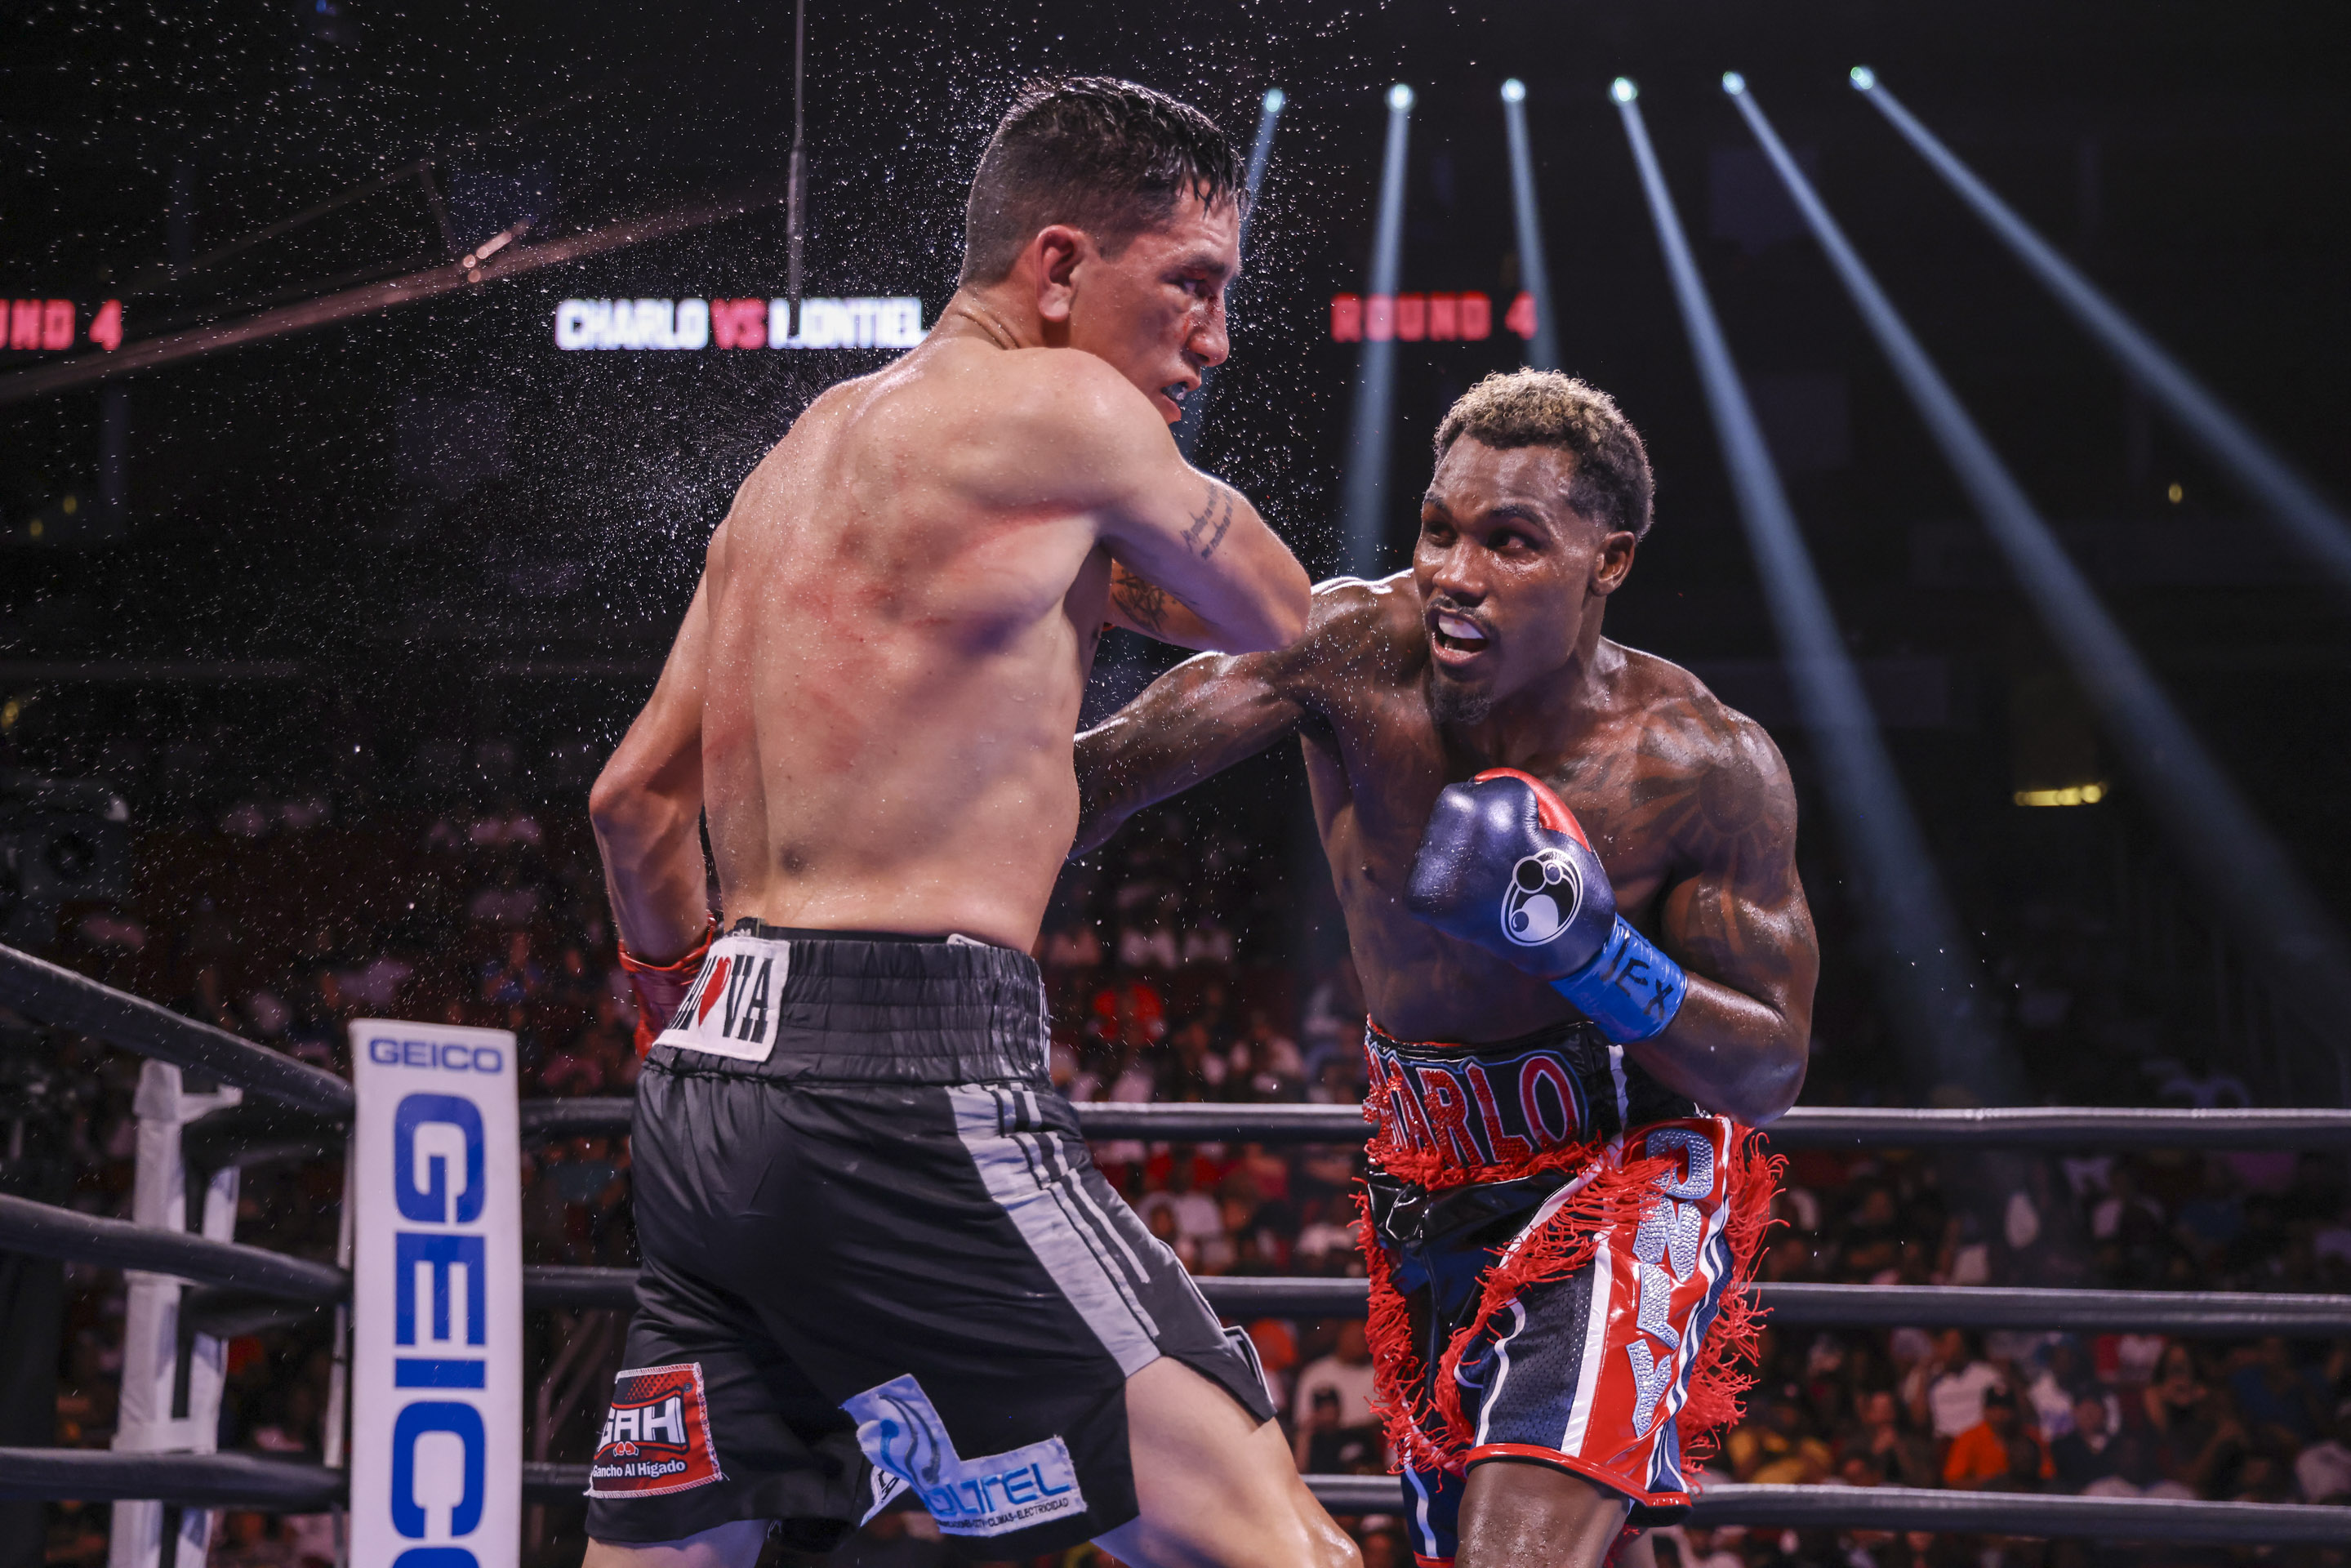 Jermall Charlo landed his best punches for 12 rounds but couldn't stop or drop gutsy Juan Montiel.